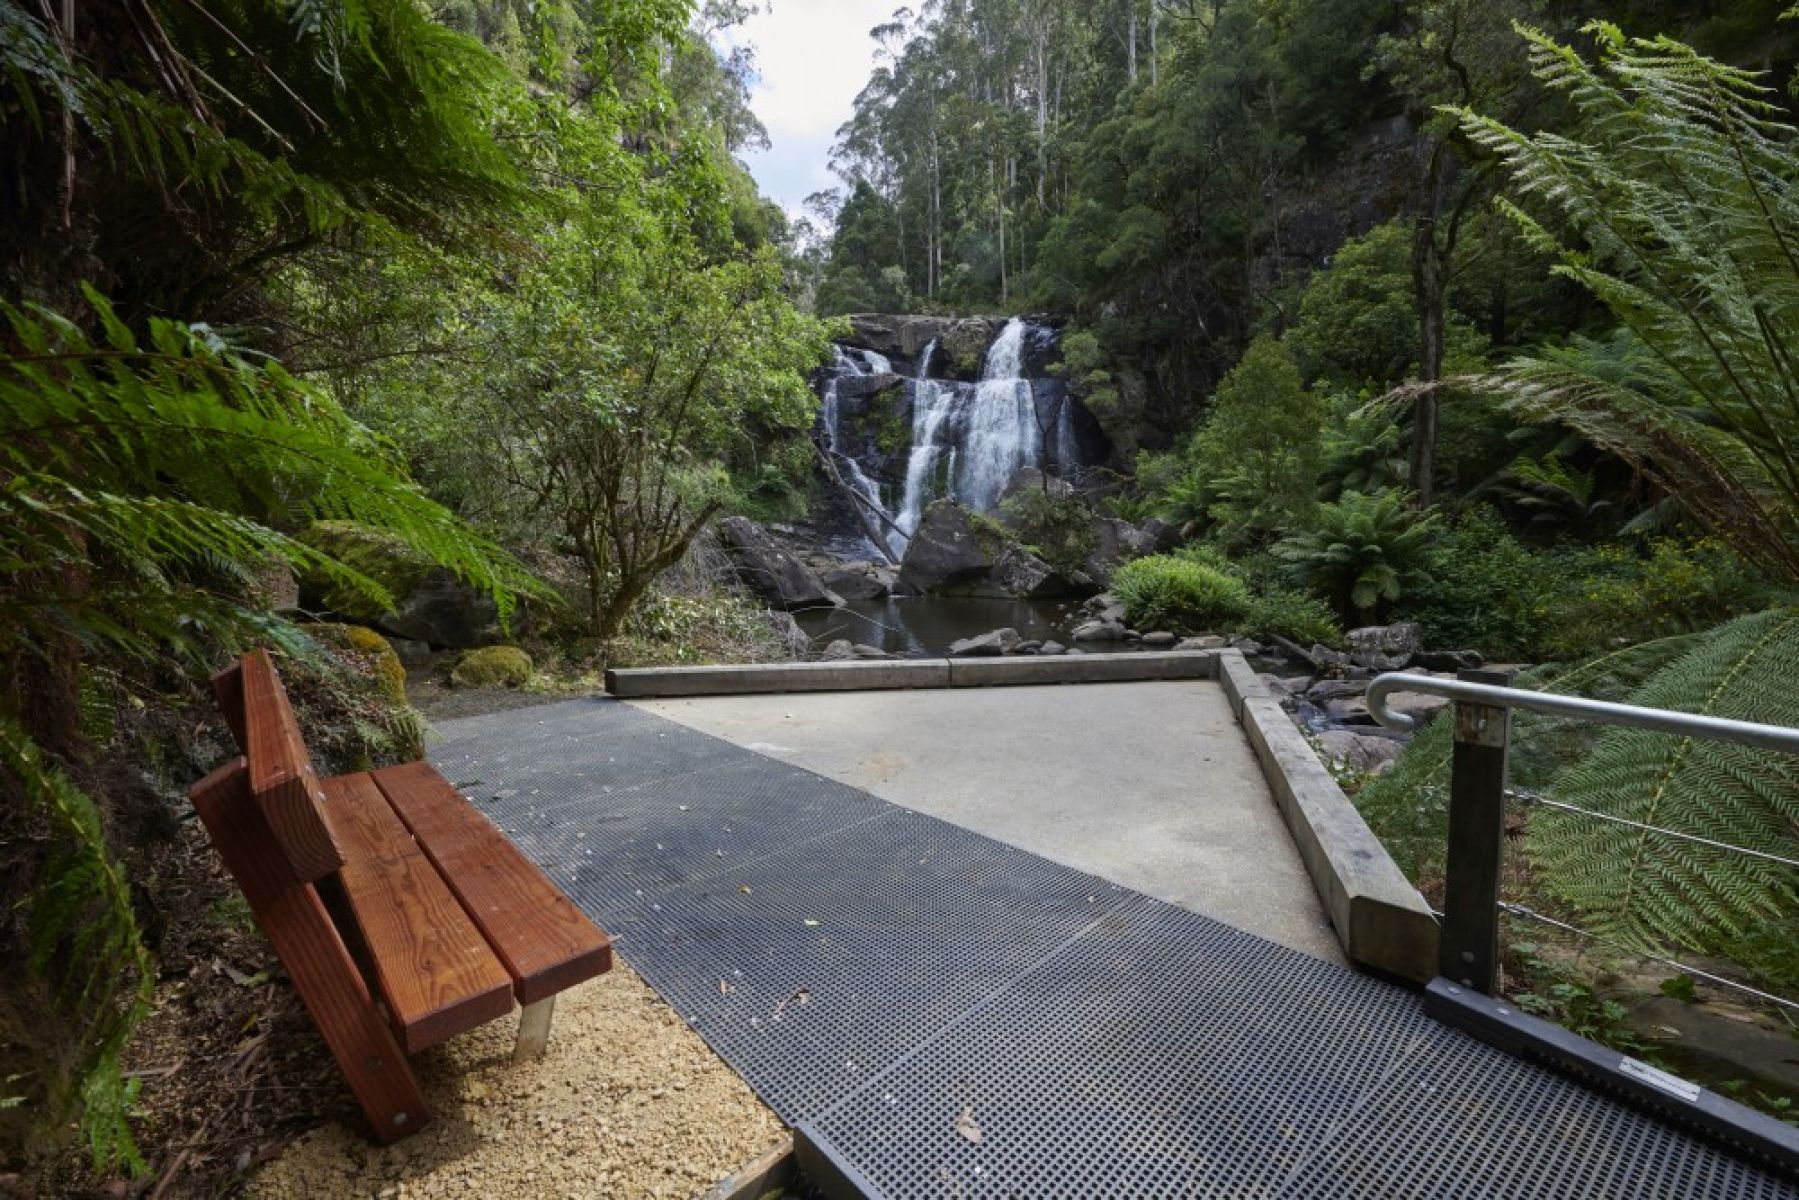 A wooden seat on a viewing platform looks out onto rushing waterfalls and lush green ferns